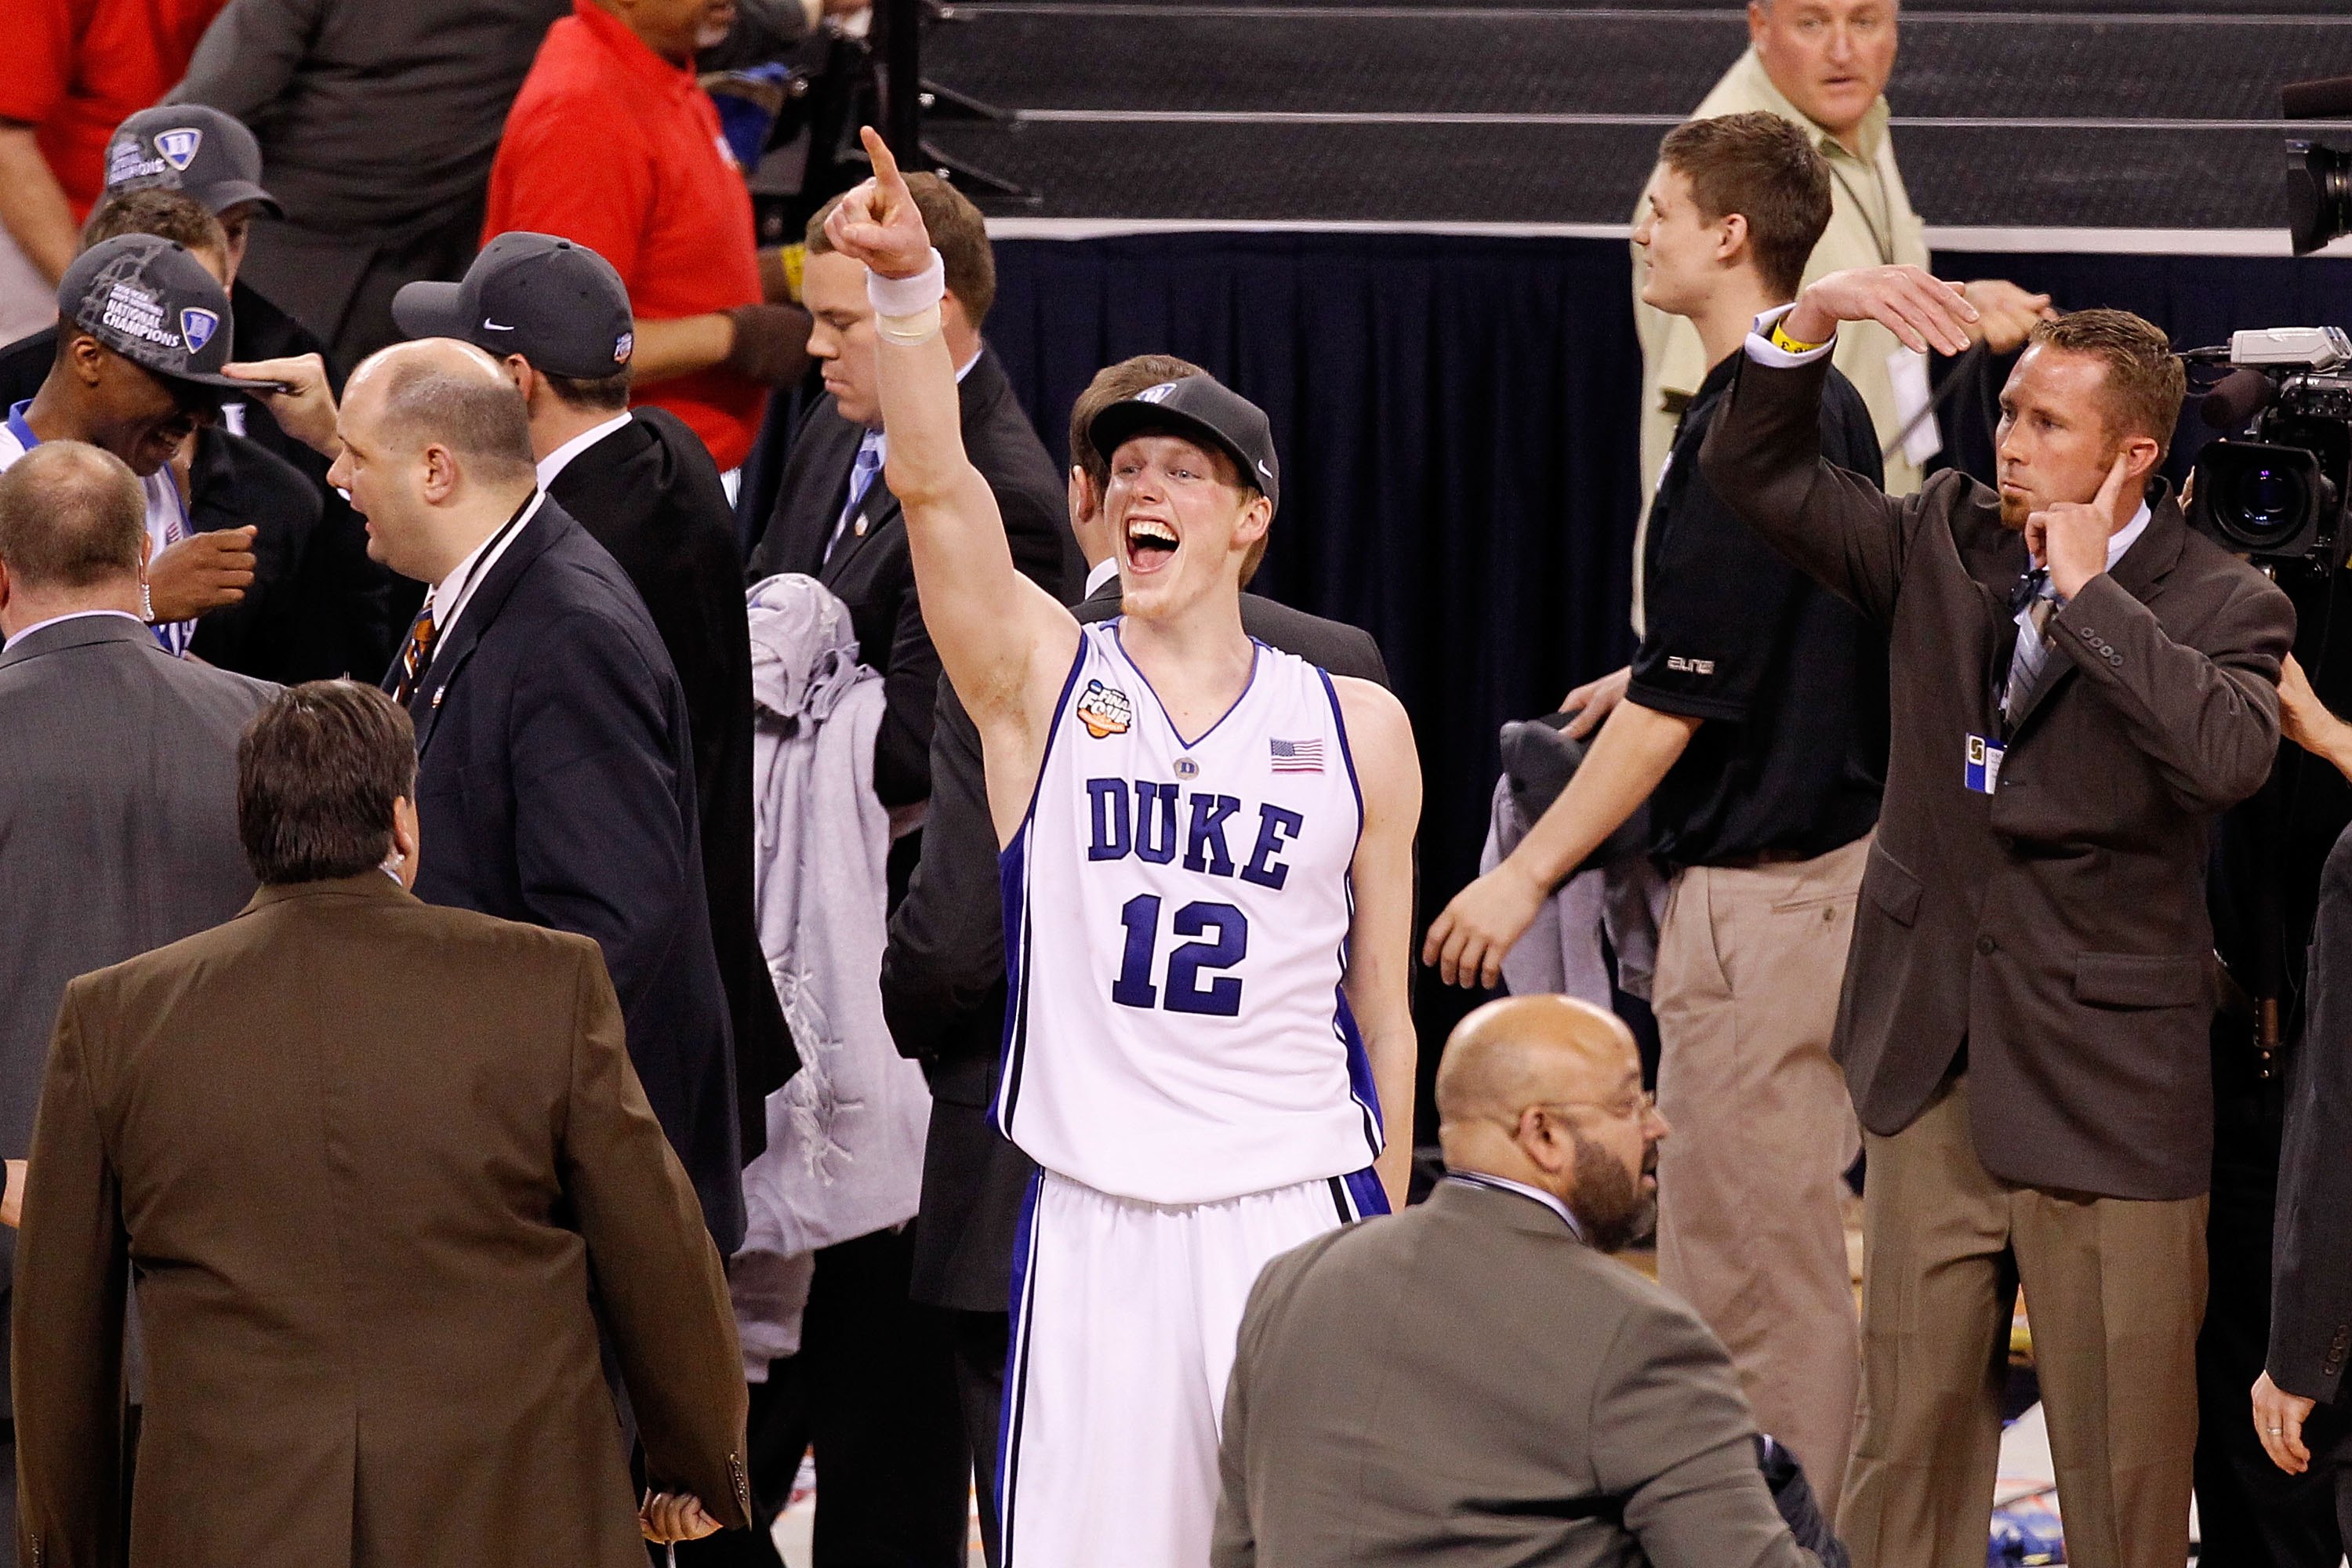 Kyle Singler of Duke after winning the title in 2009